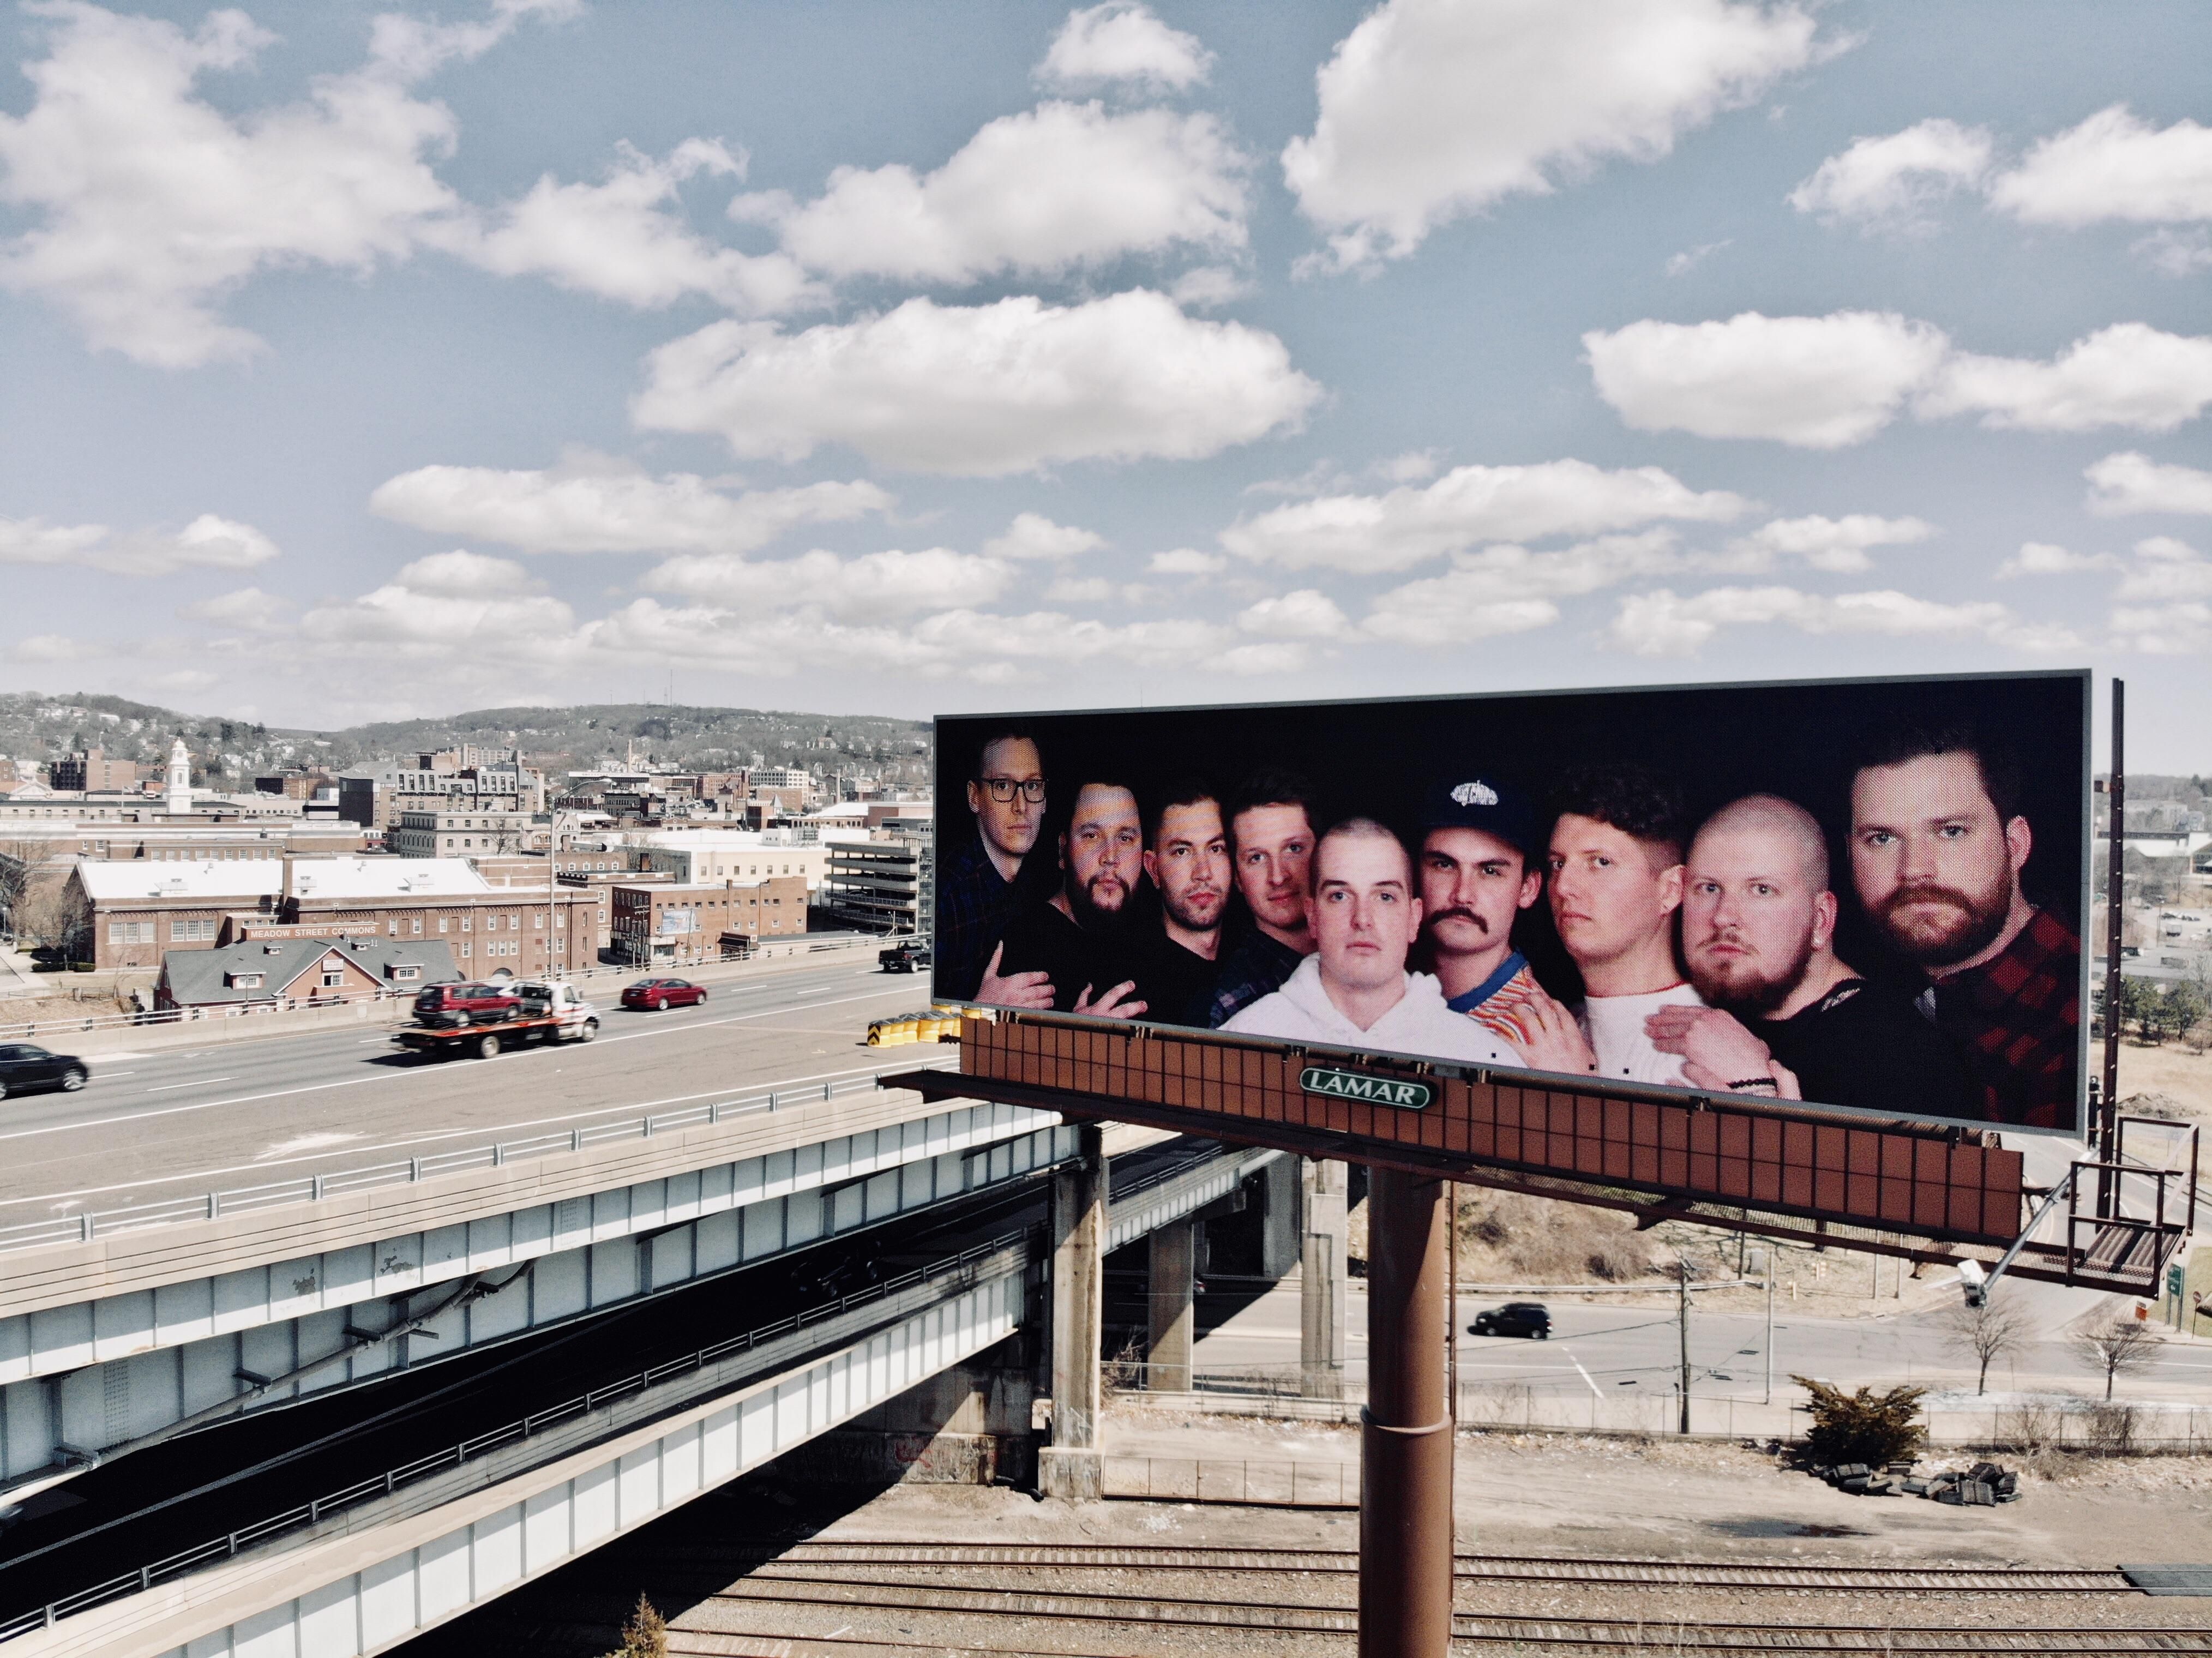 A few months ago, my friends and I got our photos taken at JC Penny Studios. Today, we put it up on a billboard in our hometown.